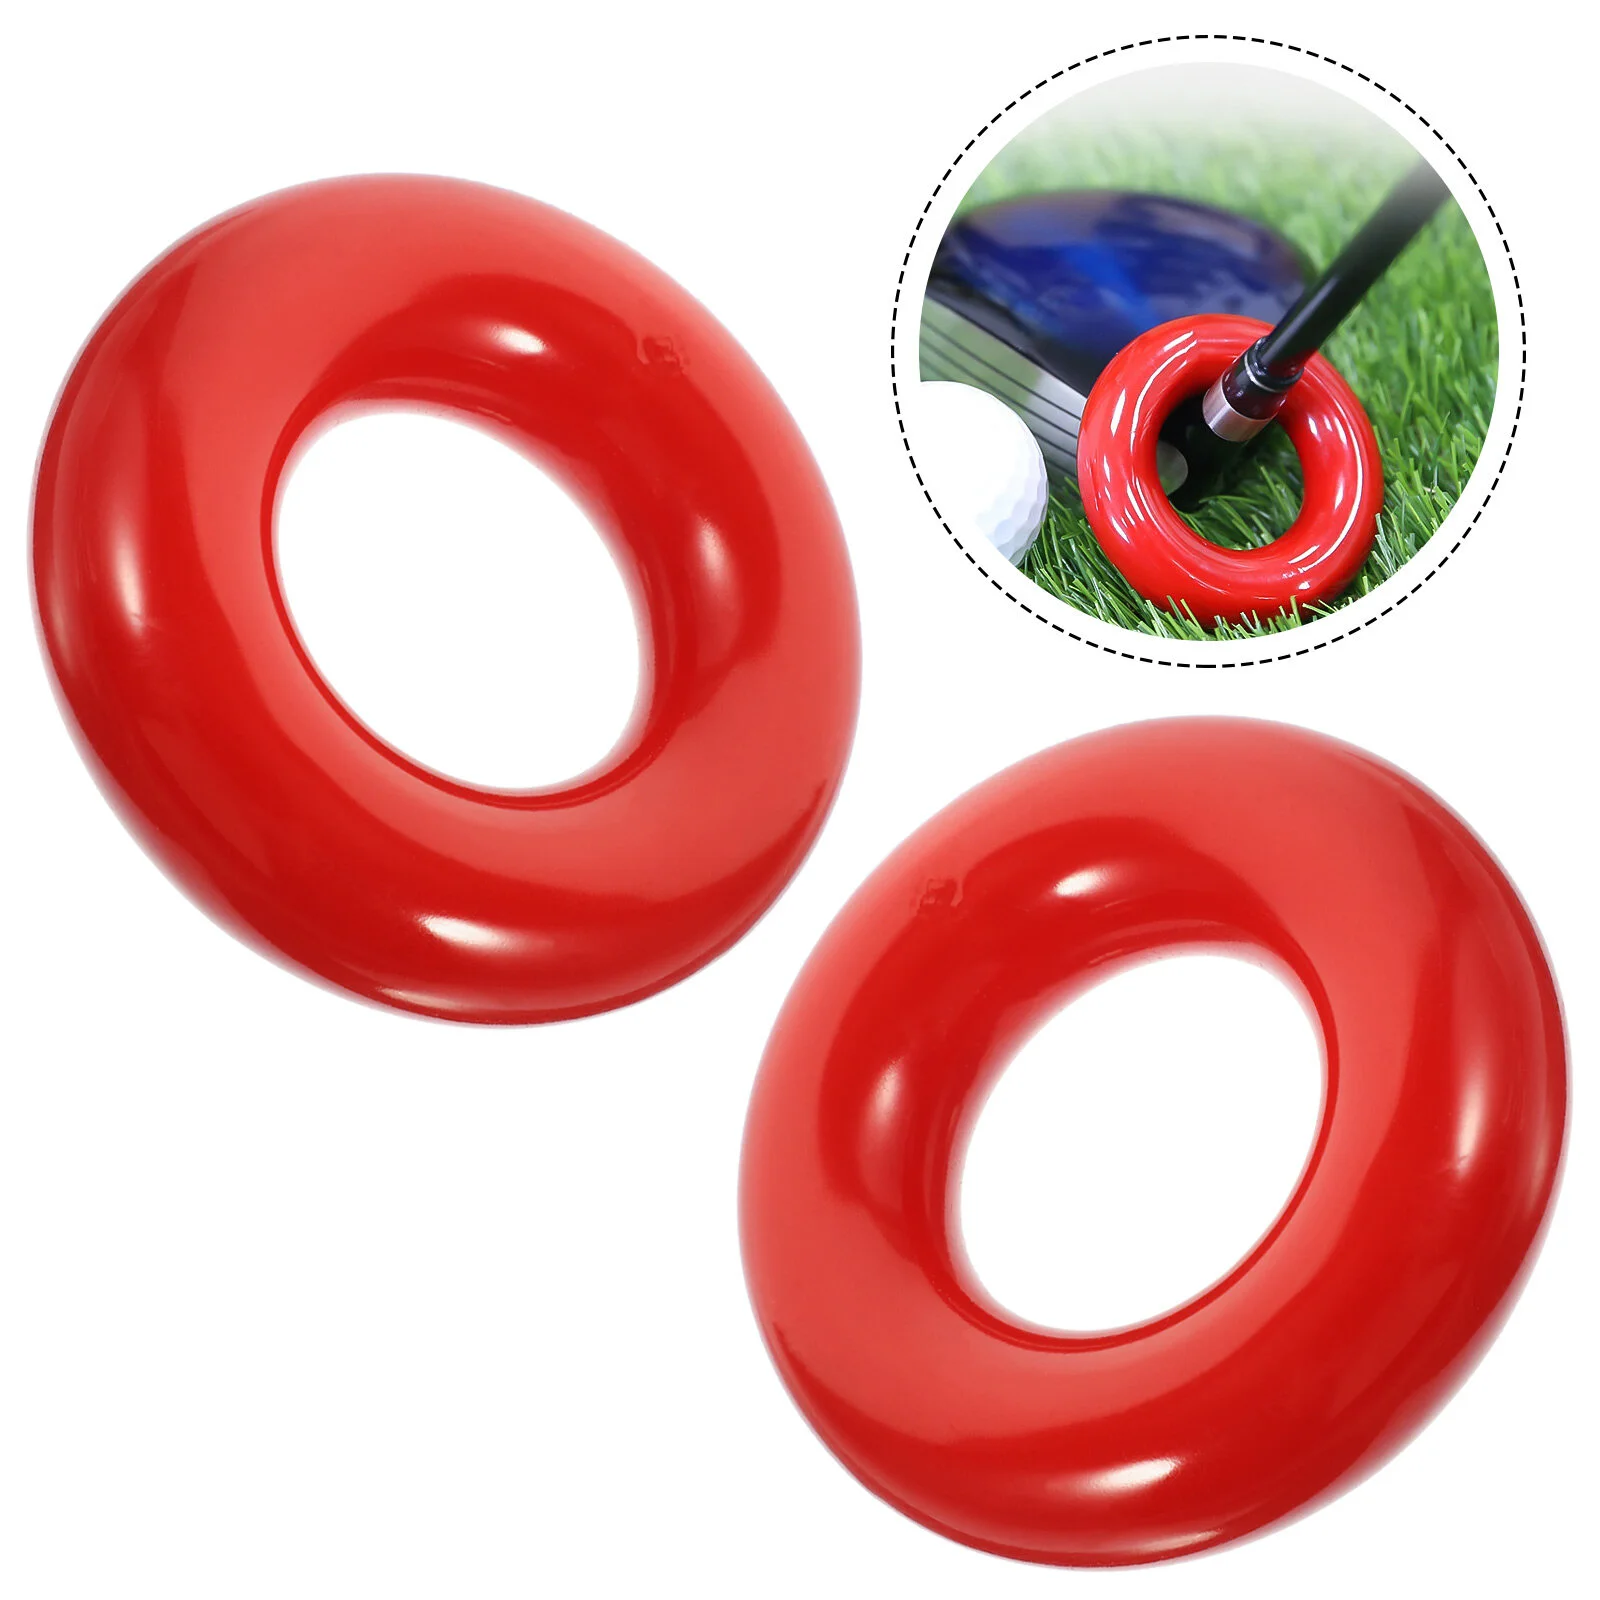 

2 Pcs Golf Weight Ring Golfing Training Weighted Swing Iron Rings Practice Tool Round Golfs Clubs Aid